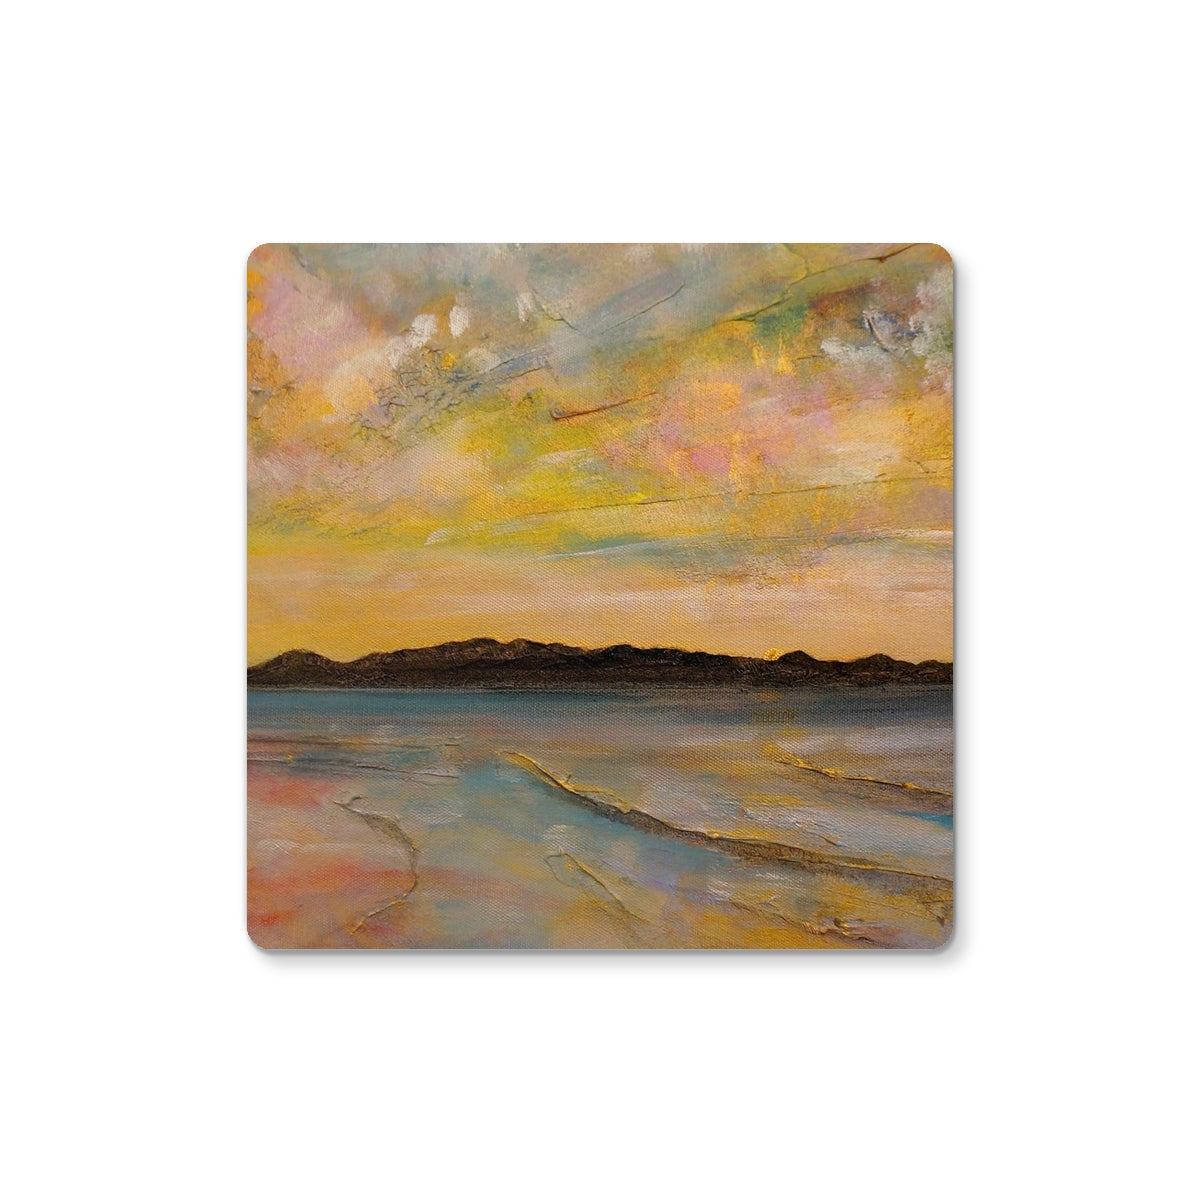 Vallay Island North Uist Art Gifts Coaster-Coasters-Hebridean Islands Art Gallery-2 Coasters-Paintings, Prints, Homeware, Art Gifts From Scotland By Scottish Artist Kevin Hunter